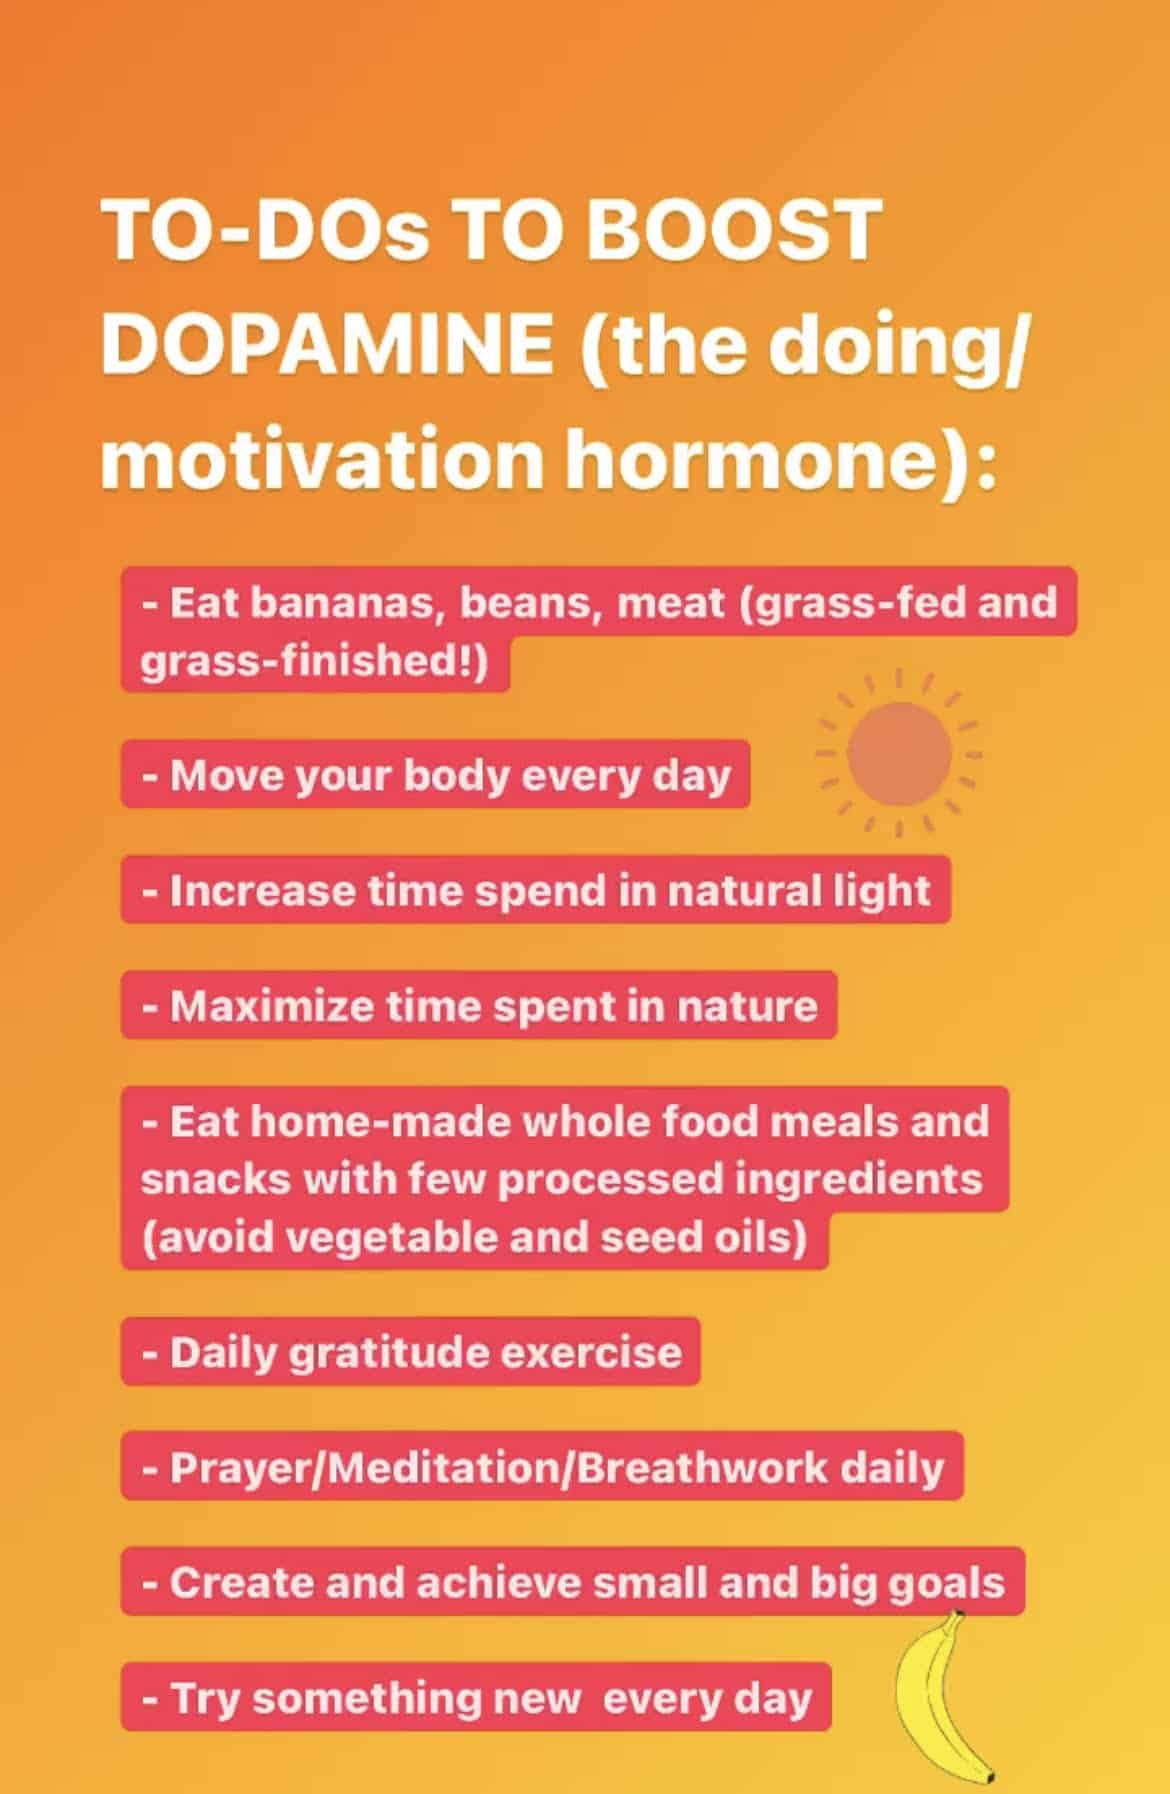 What to do When Bored? 20 Fun Things for the Missing Dopamine